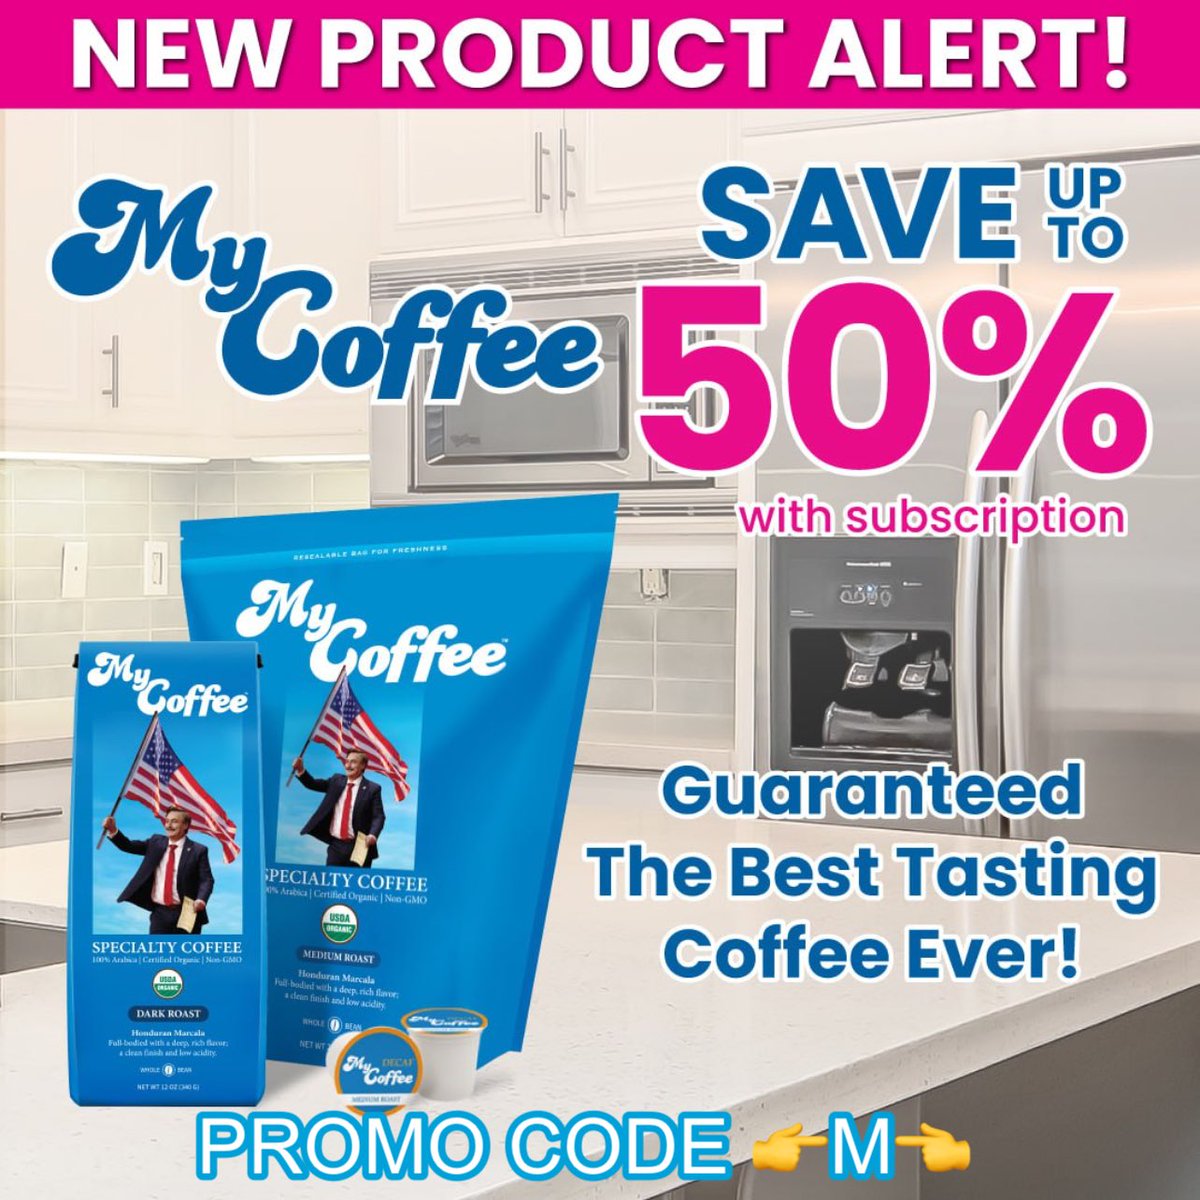 NEW PRODUCT ALERT - Elevate your morning routine with MyCoffee! Save up to 50% when you use promo code 👉M👈. and experience the best tasting coffee guaranteed. Don't miss out on this delicious deal! mypillow.com/mycoffee-subsc… #MyCoffee #MyPillow #MorningFuel #DiscountAlert